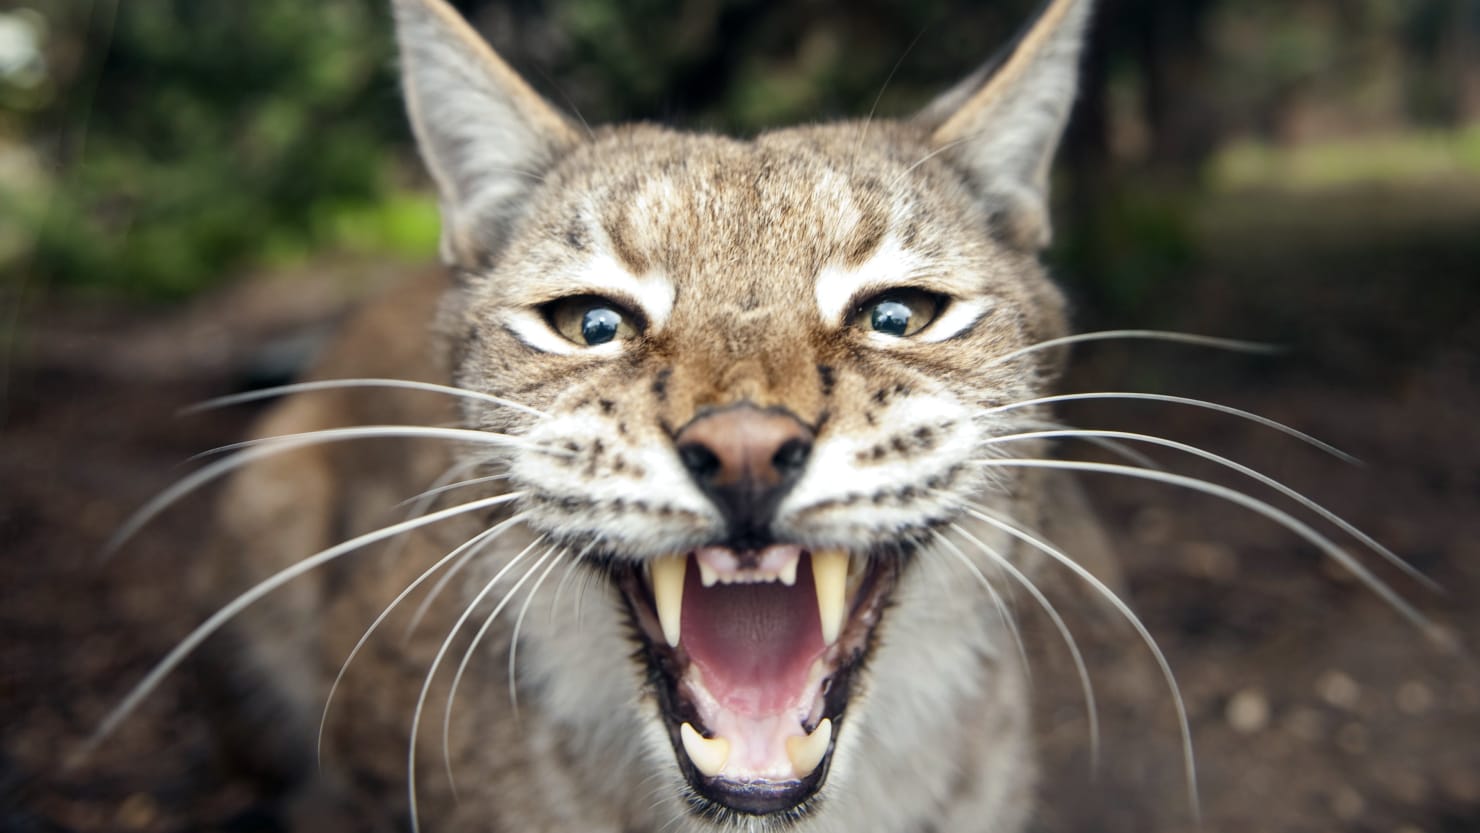 Billionaires seek to reintroduce the lynx in the Scottish highlands after 500 years